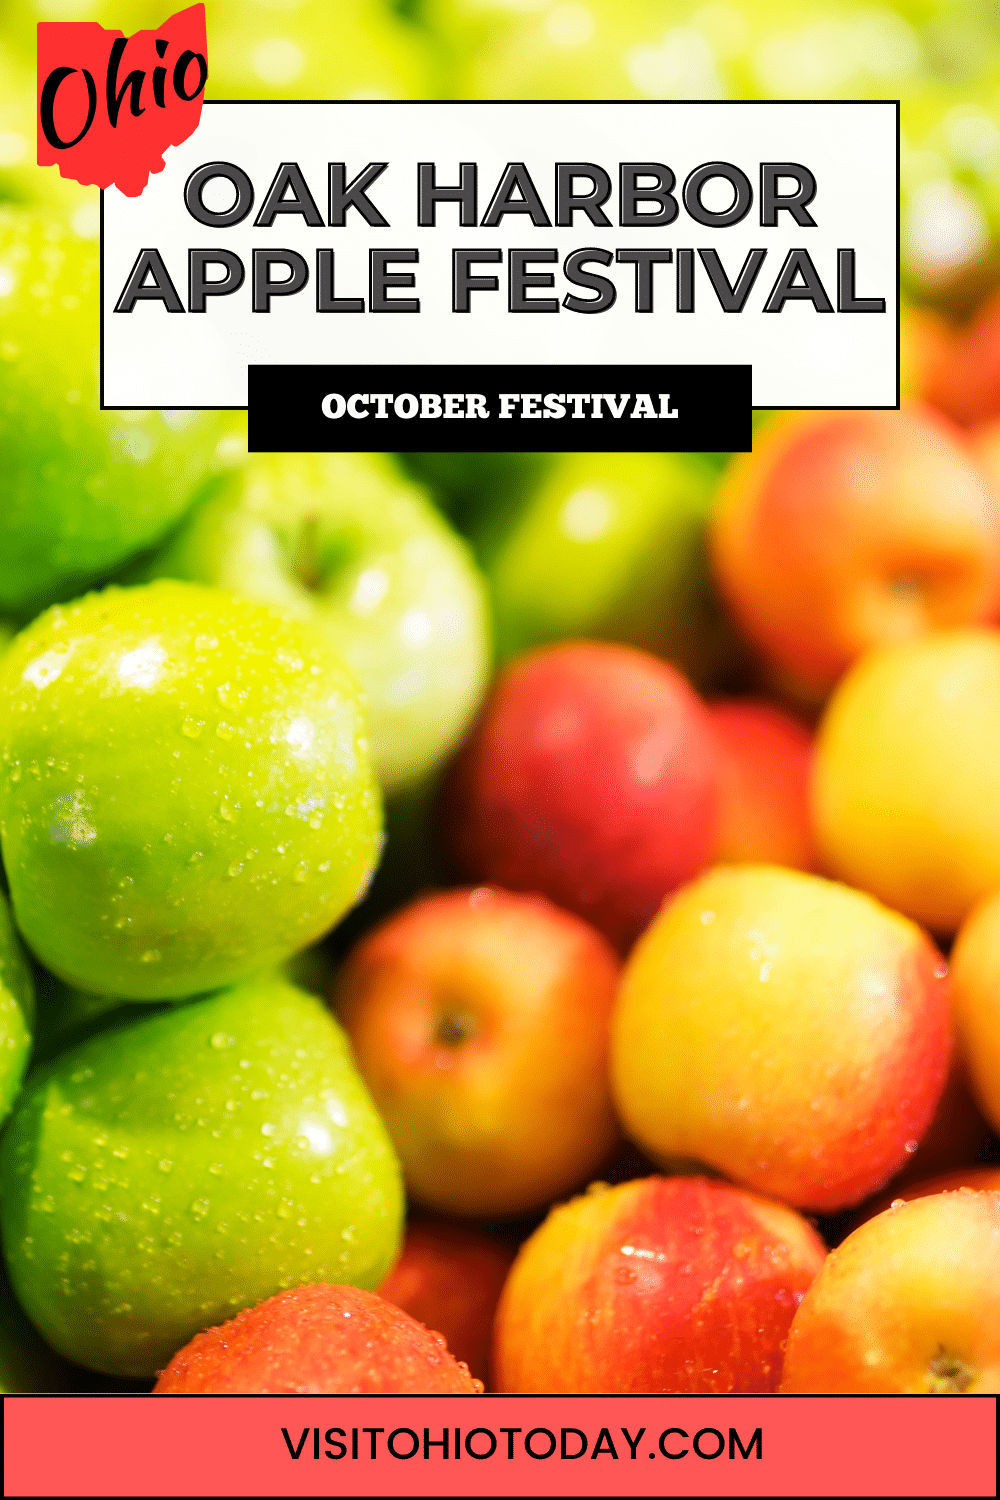 This festival is held in Downtown Oak Harbor on the weekend of October 14 and 15. This fun-filled festival has something for everyone!